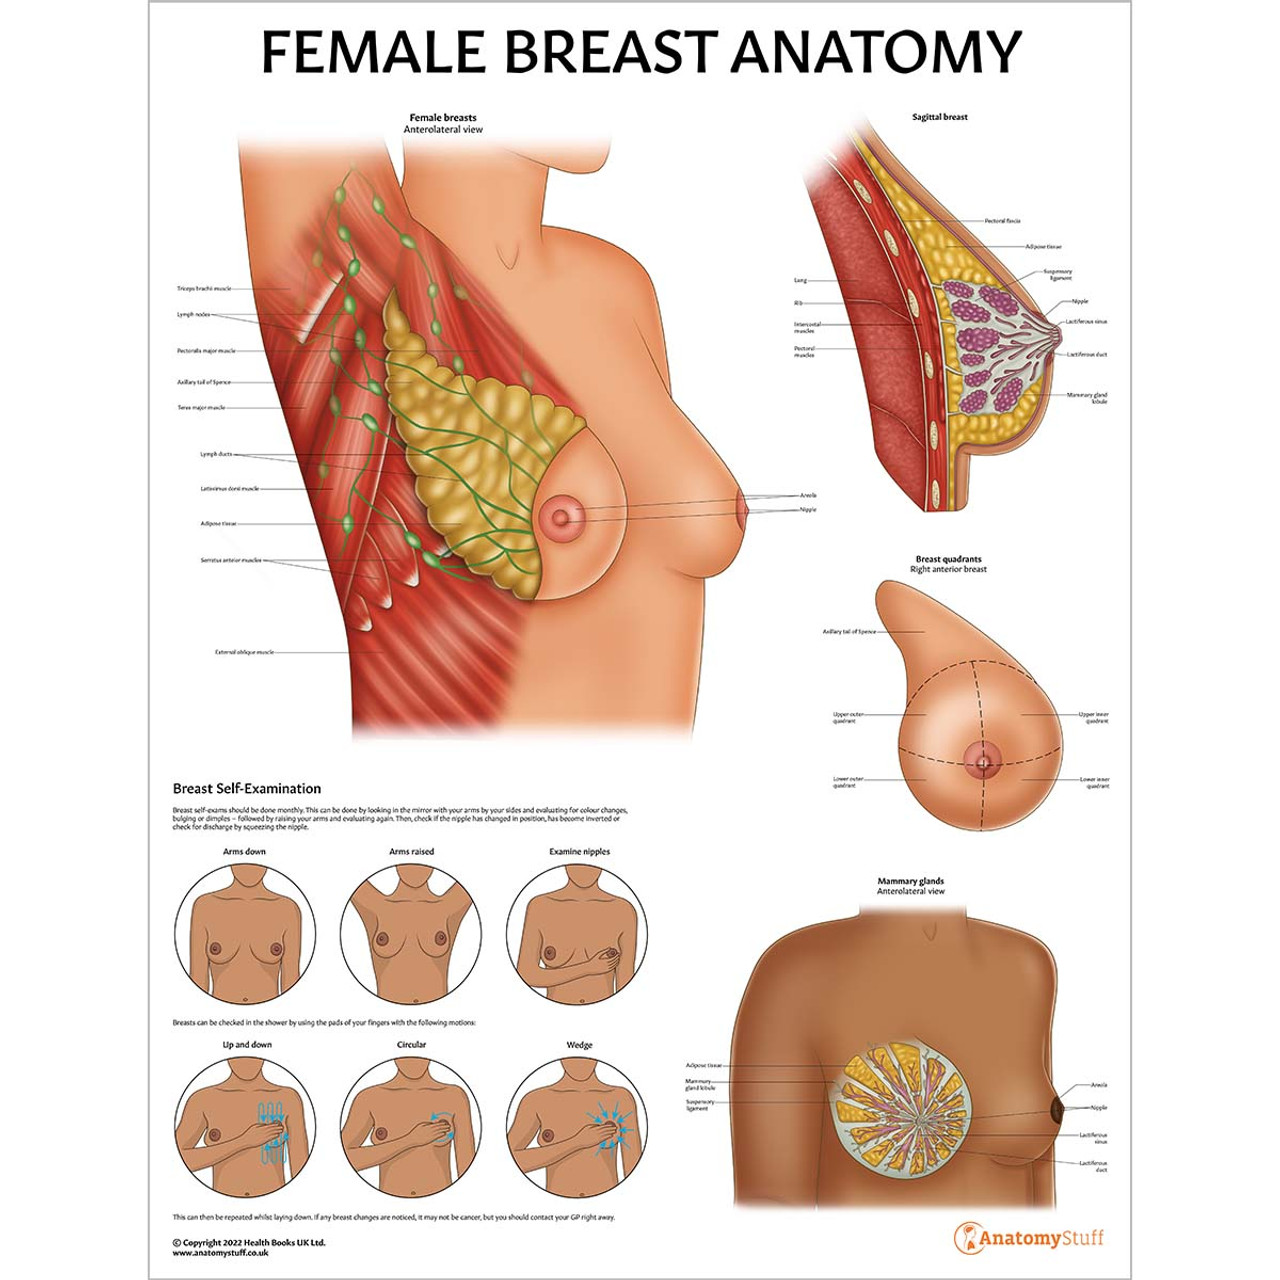 Schematic diagram showing the anatomy of the breast.